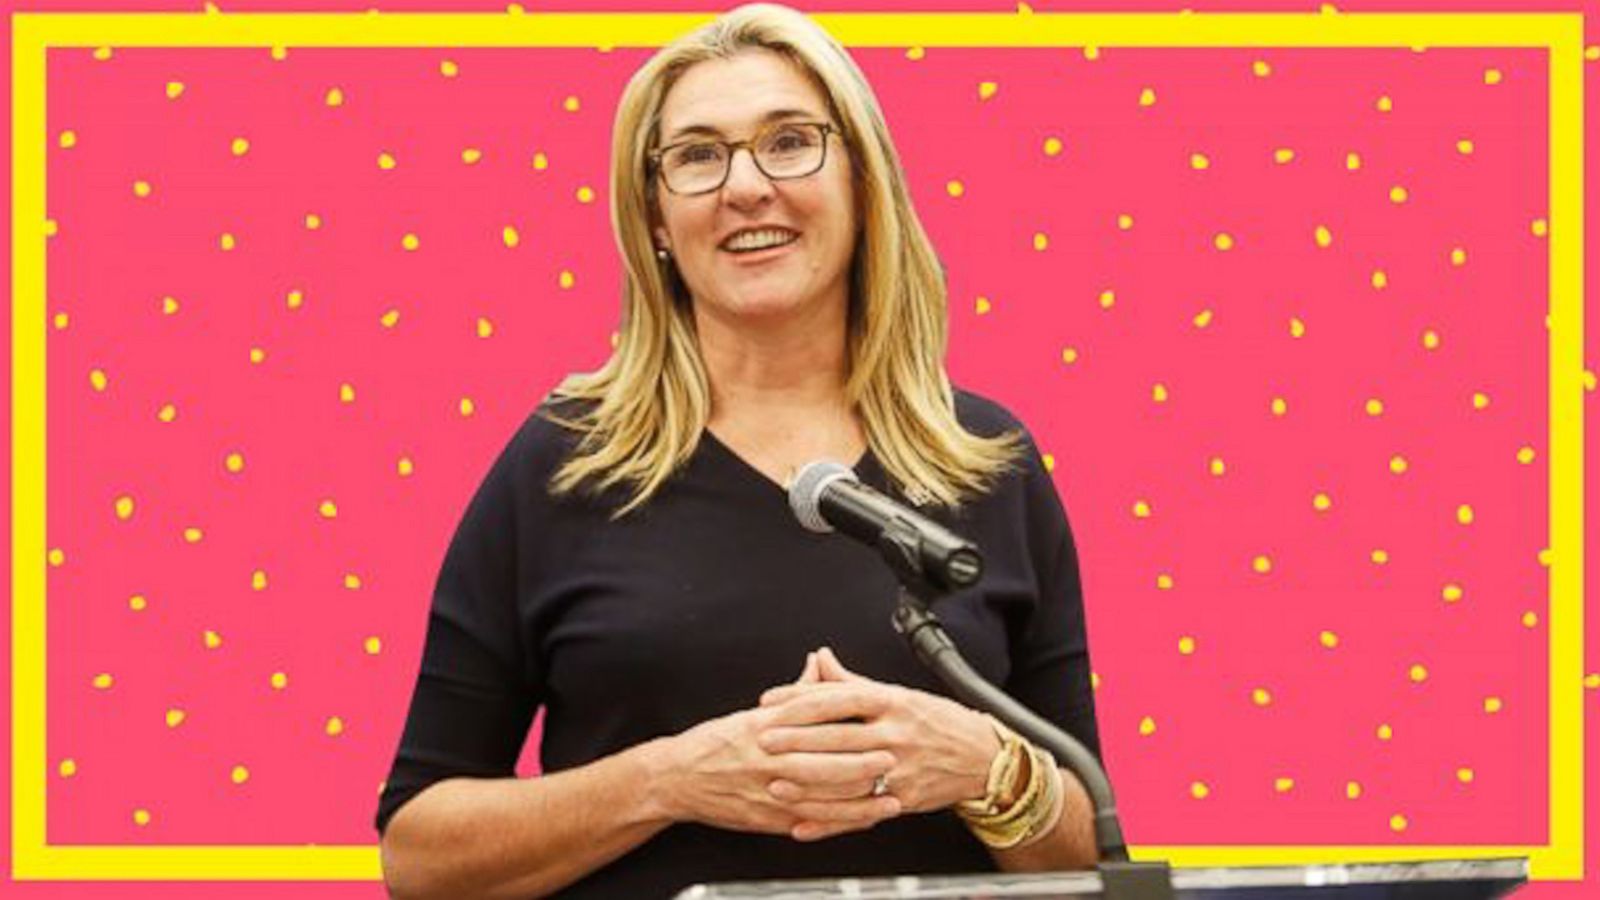 VIDEO: Vice Media CEO Nancy Dubuc shares the worst advice she's received